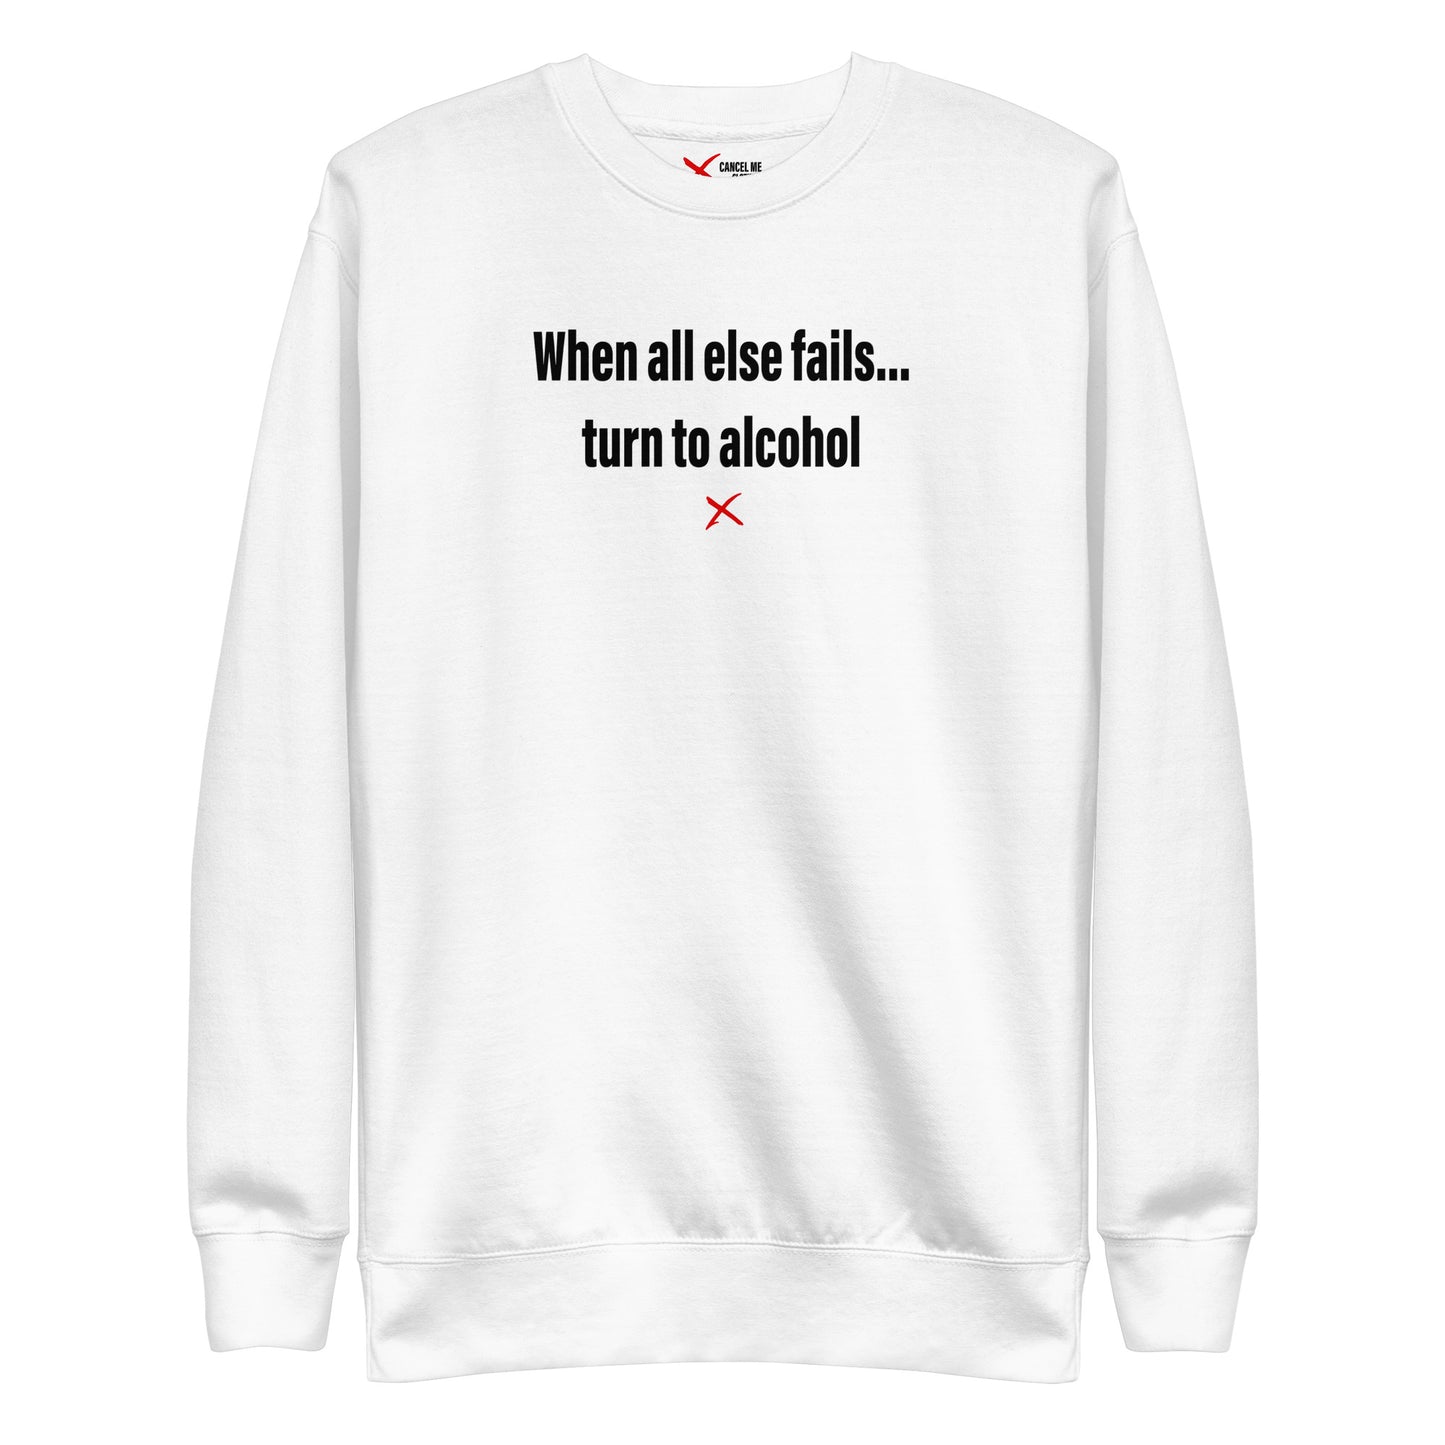 When all else fails... turn to alcohol - Sweatshirt